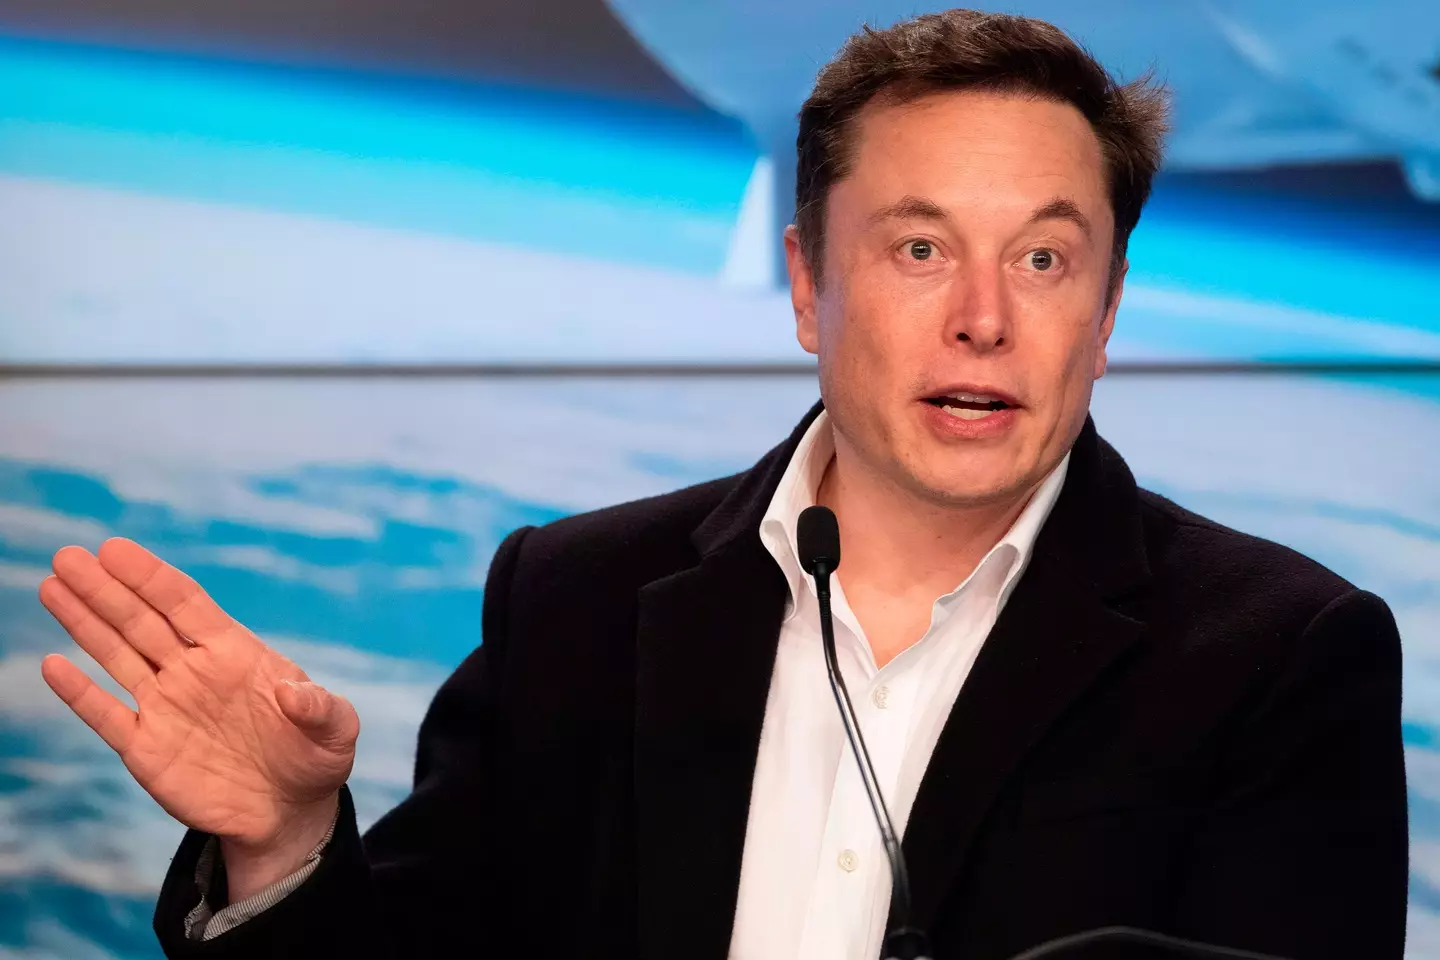 Elon Musk took a 'crazy amount' of flights this year.